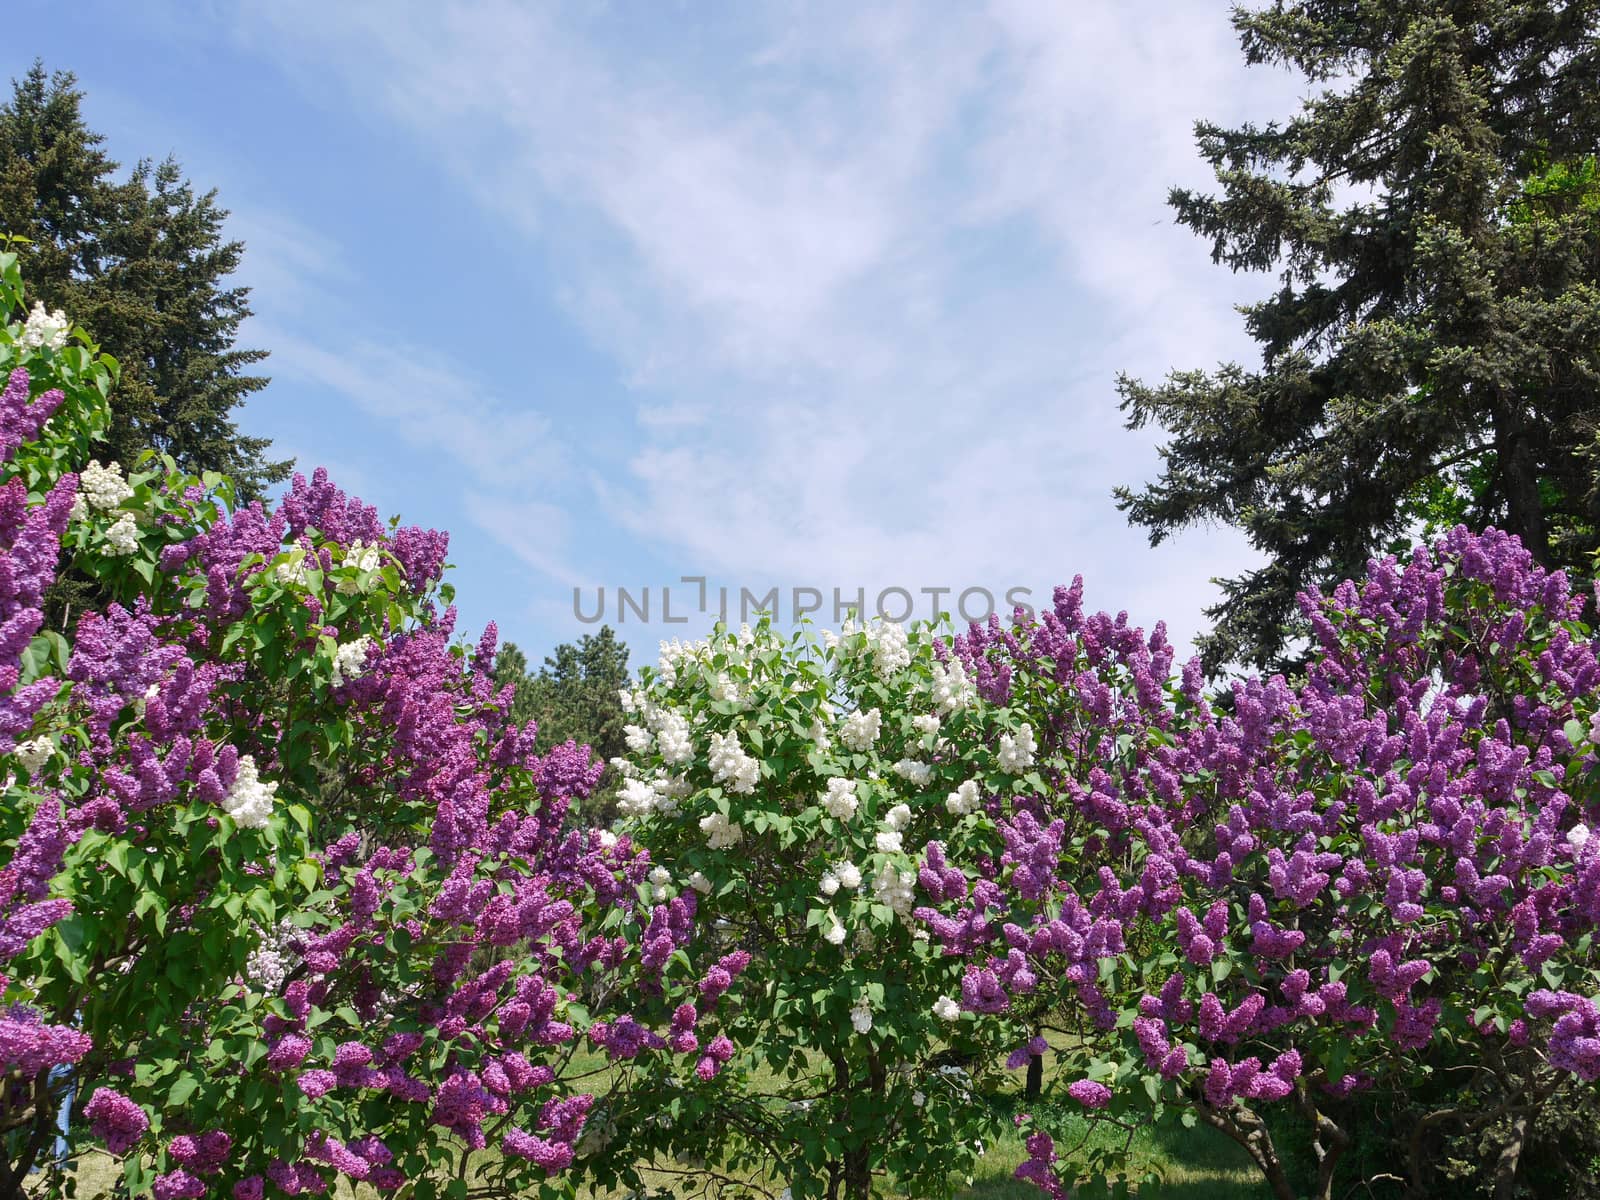 magnificent bushes of blossoming lilacs against the background of firs and blue skies by Adamchuk